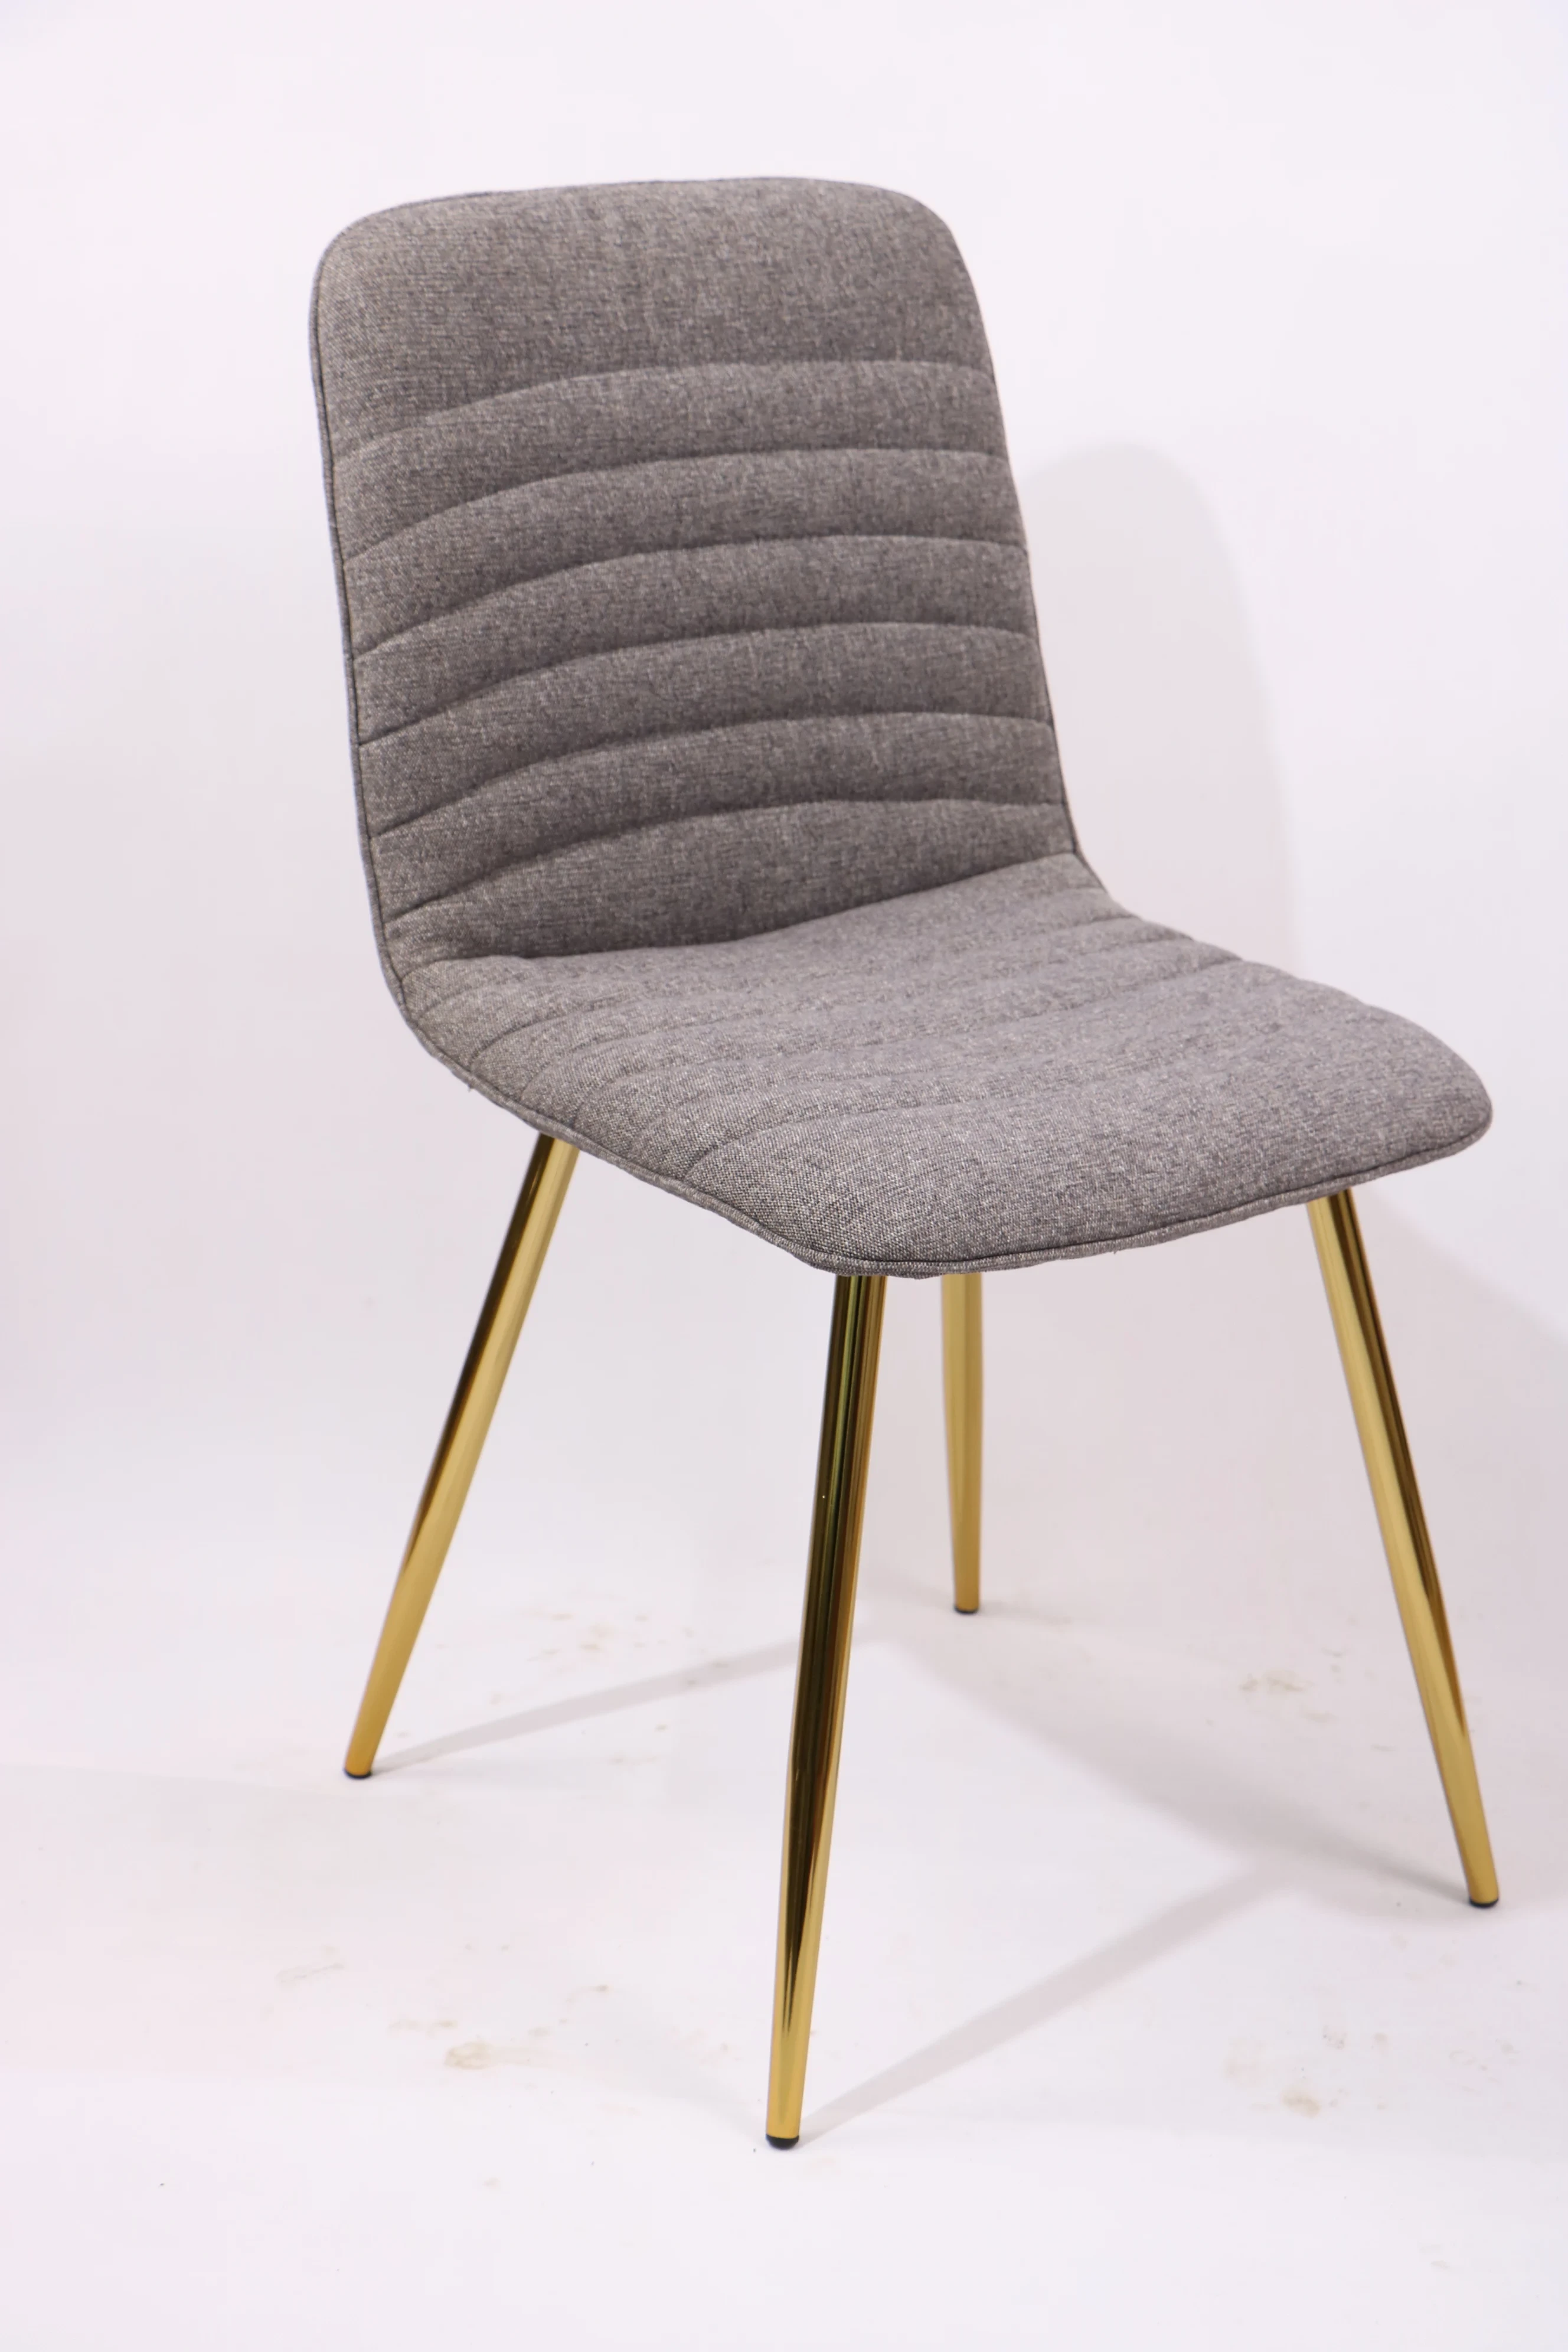 The Elegance of OEM Grey Backrest Dining Chairs in Modern Home Decor